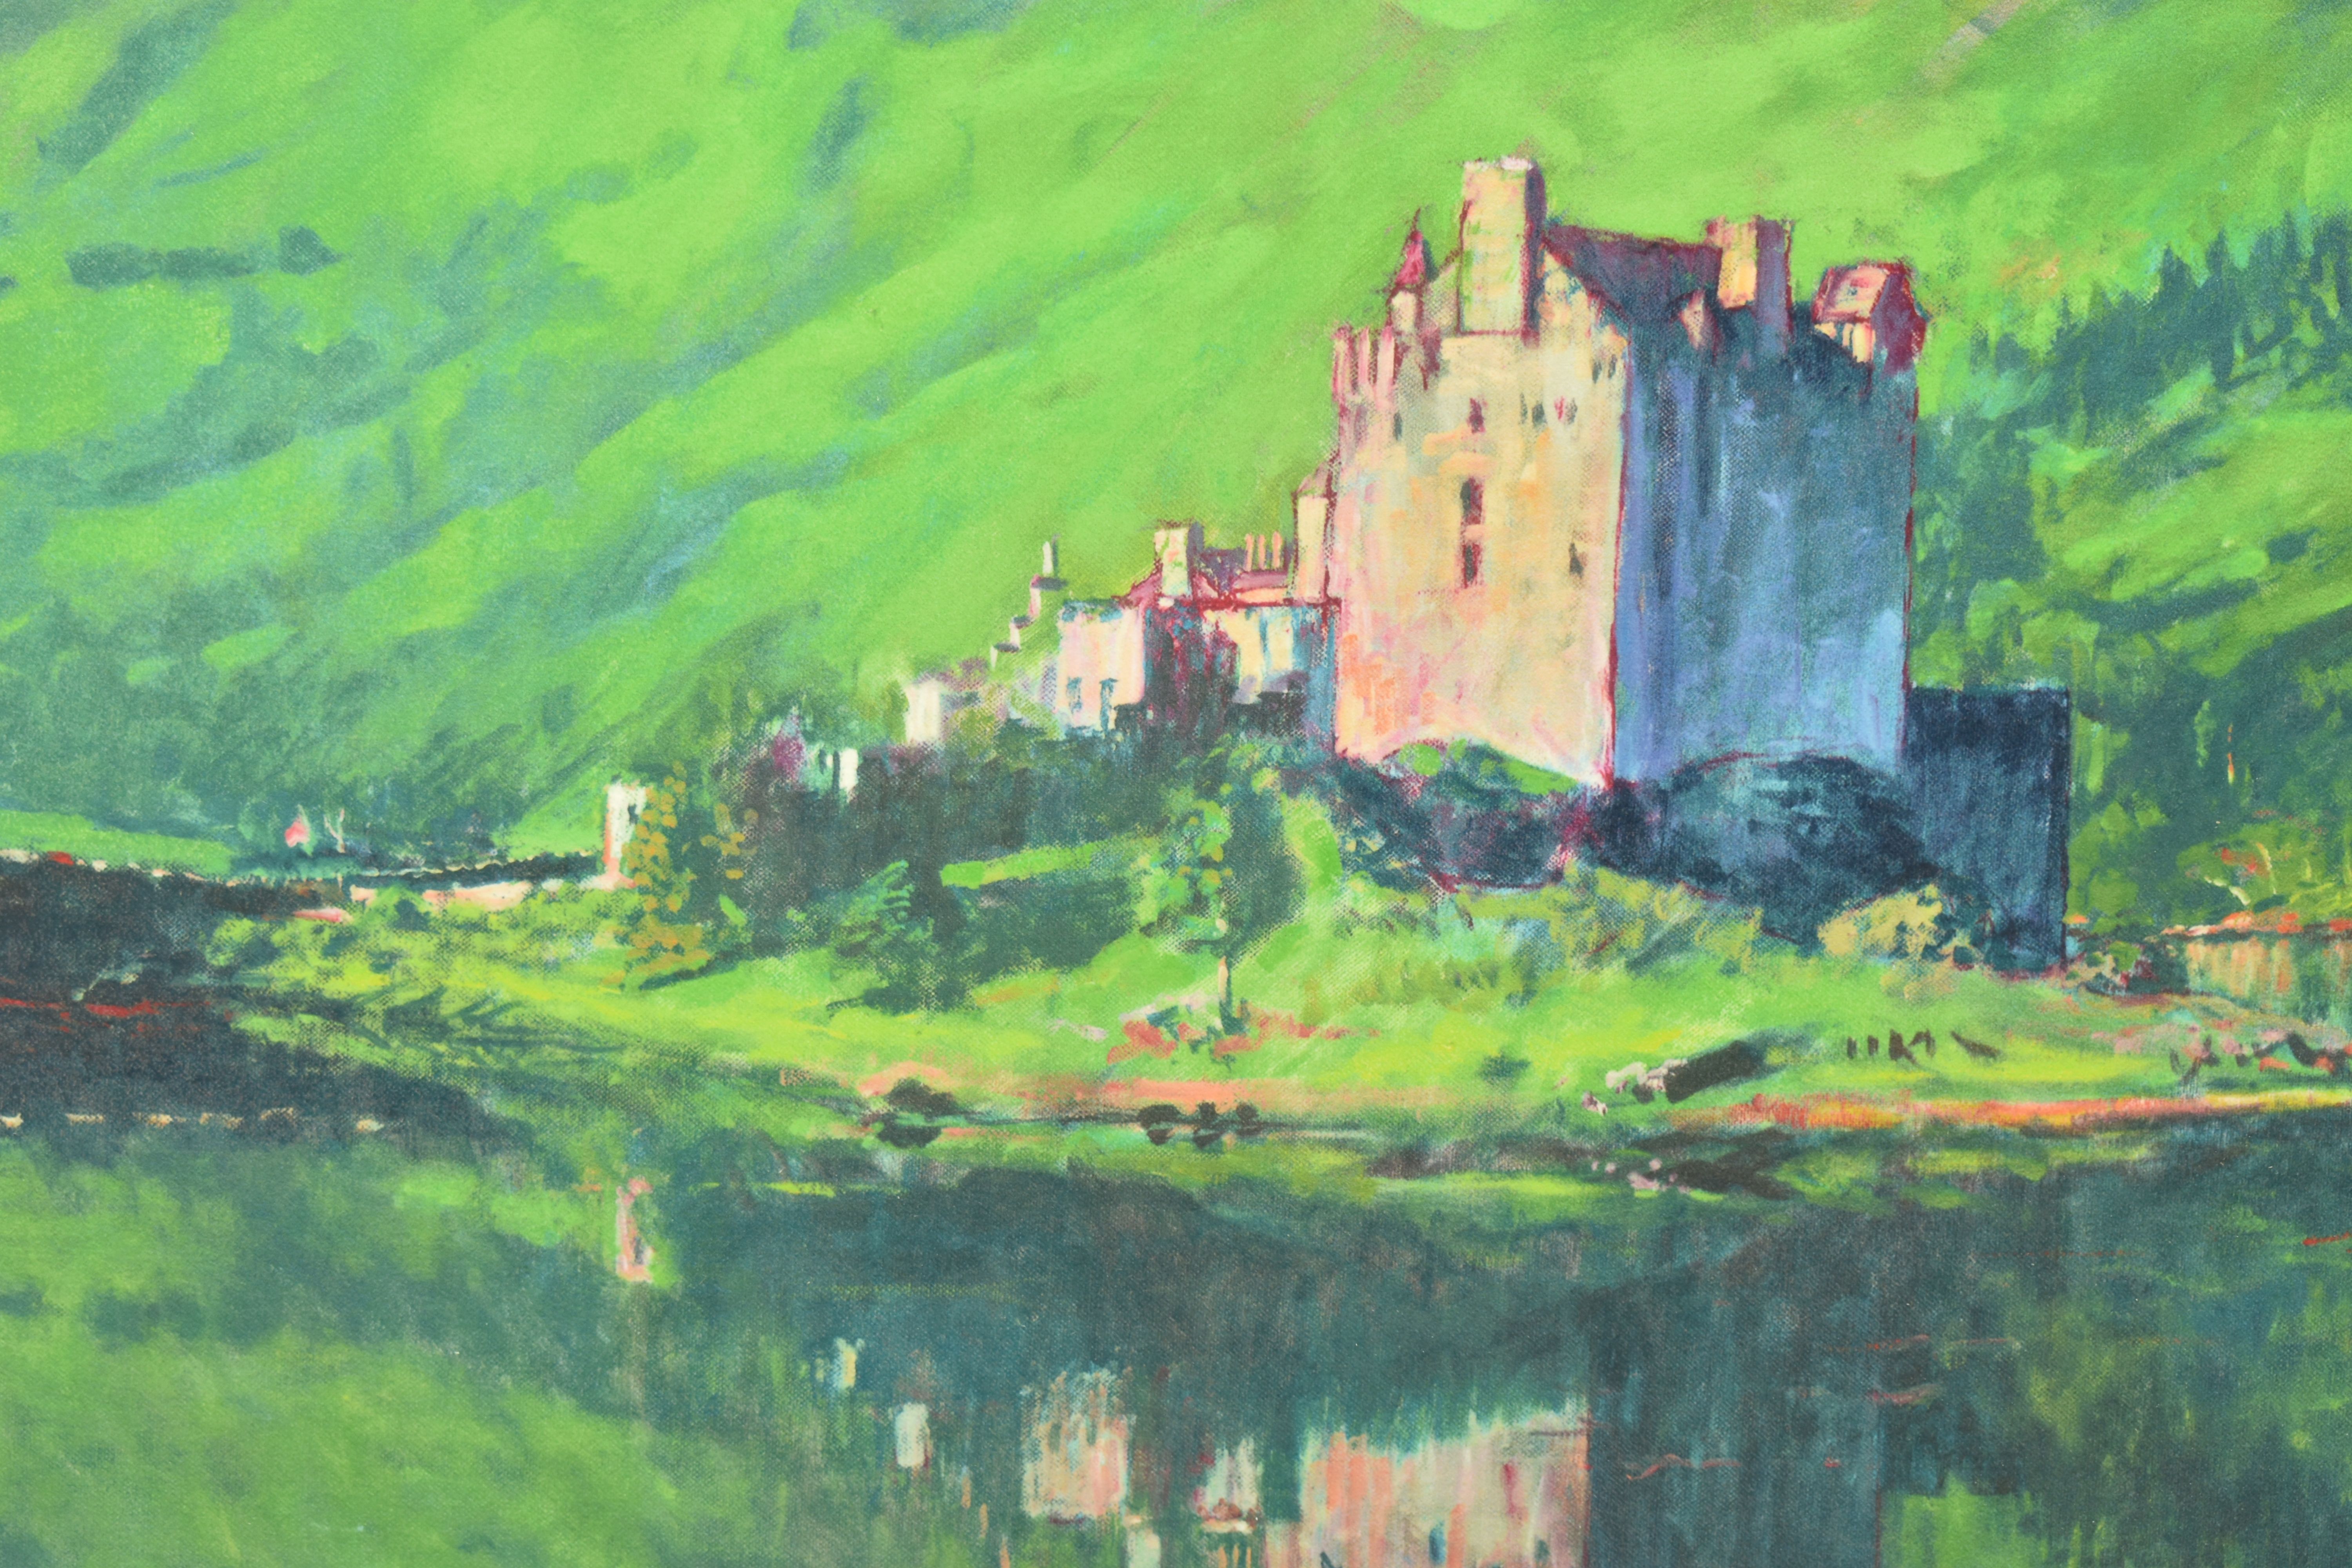 ROLF HARRIS (AUSTRALIA 1930-2023) 'REFLECTION, EILEAN DONAN CASTLE' a signed limited edition print - Image 3 of 10